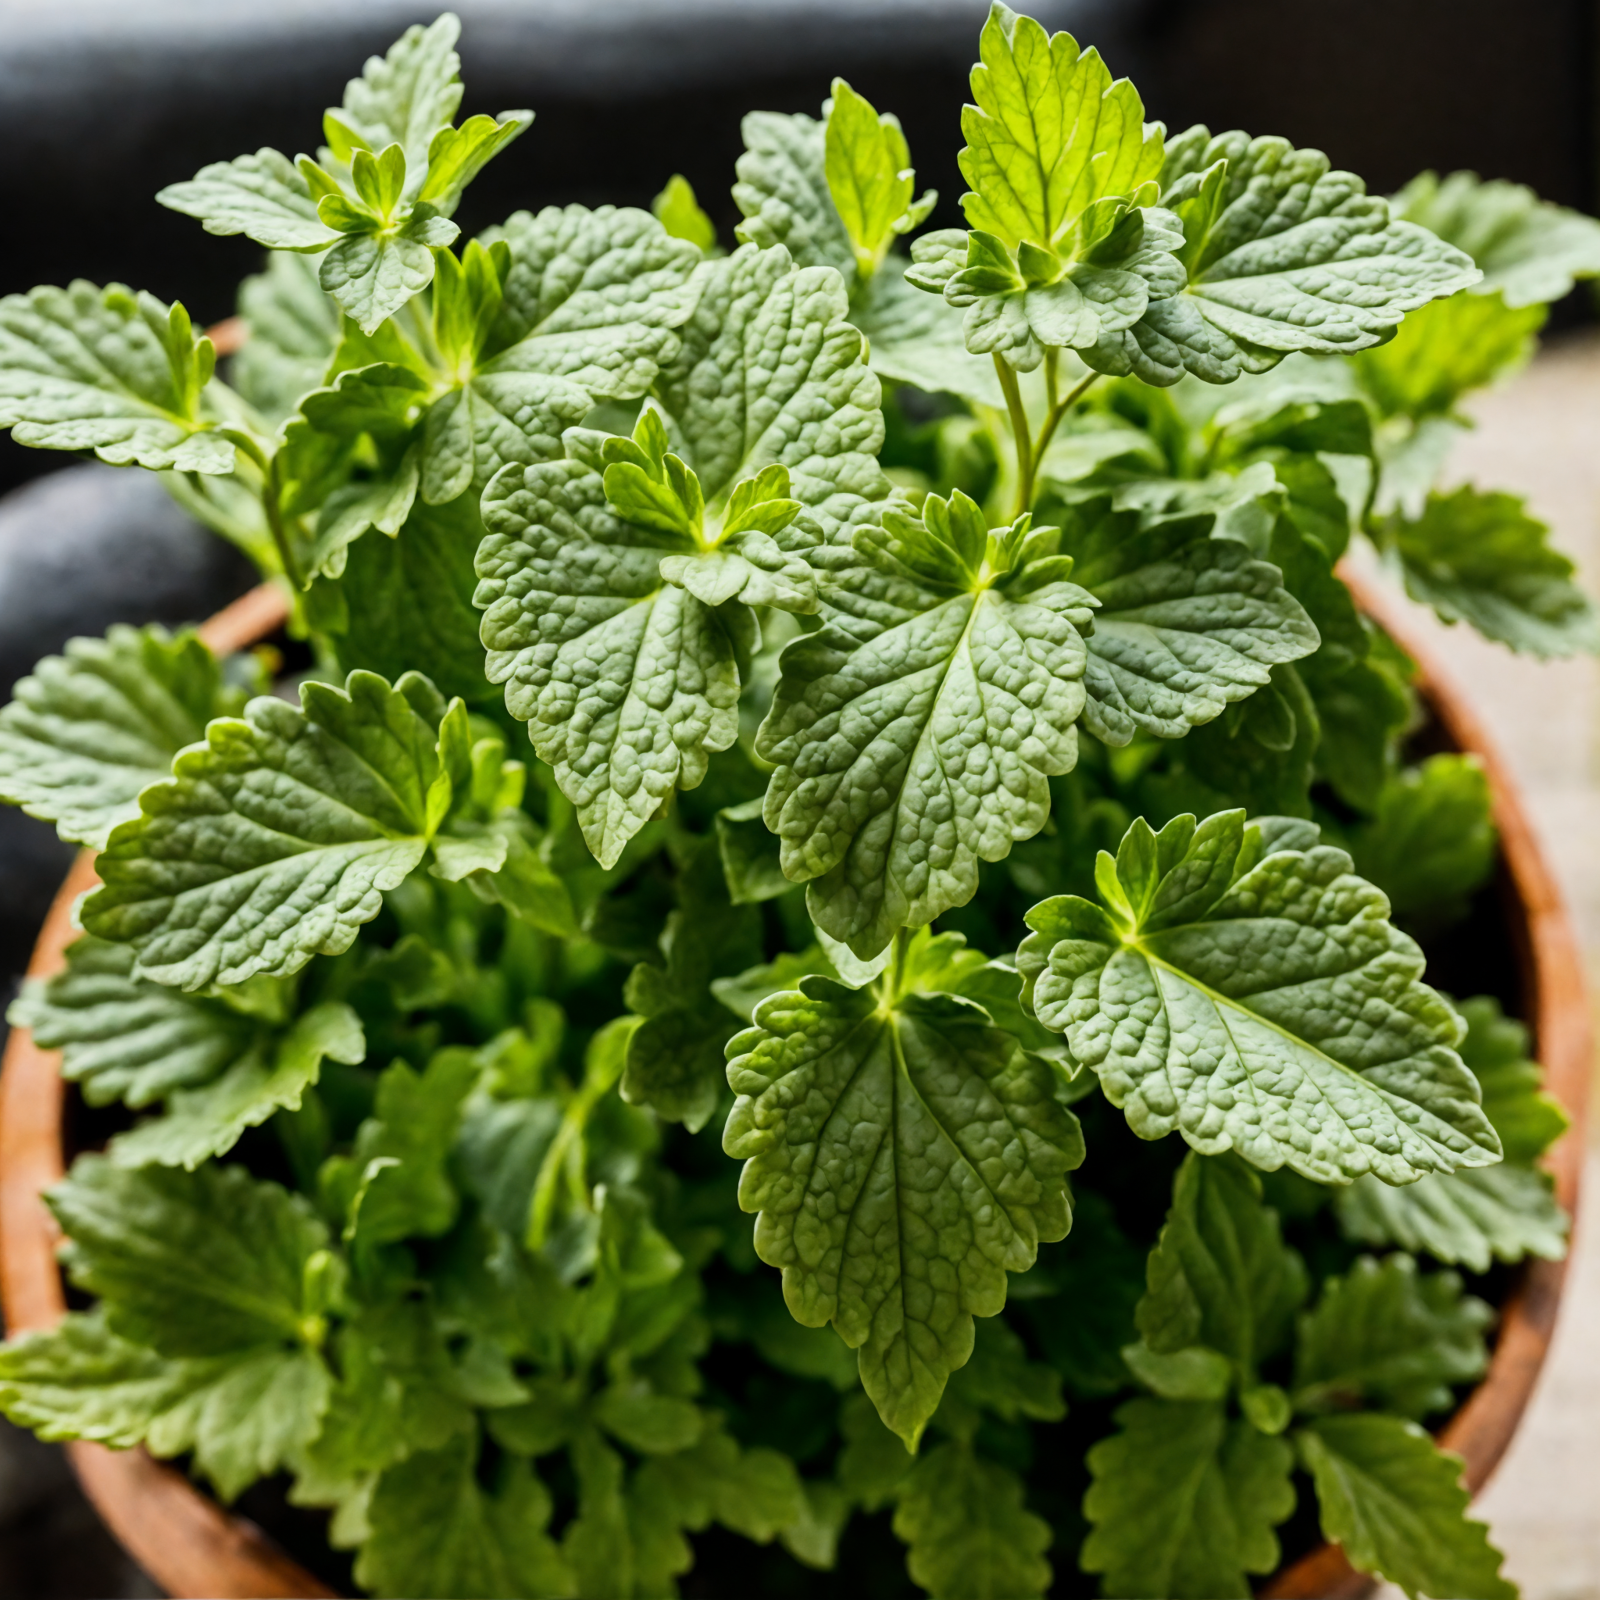 Nepeta cataria (catnip) in a bowl, with clear lighting and a dark background, as part of indoor decor.